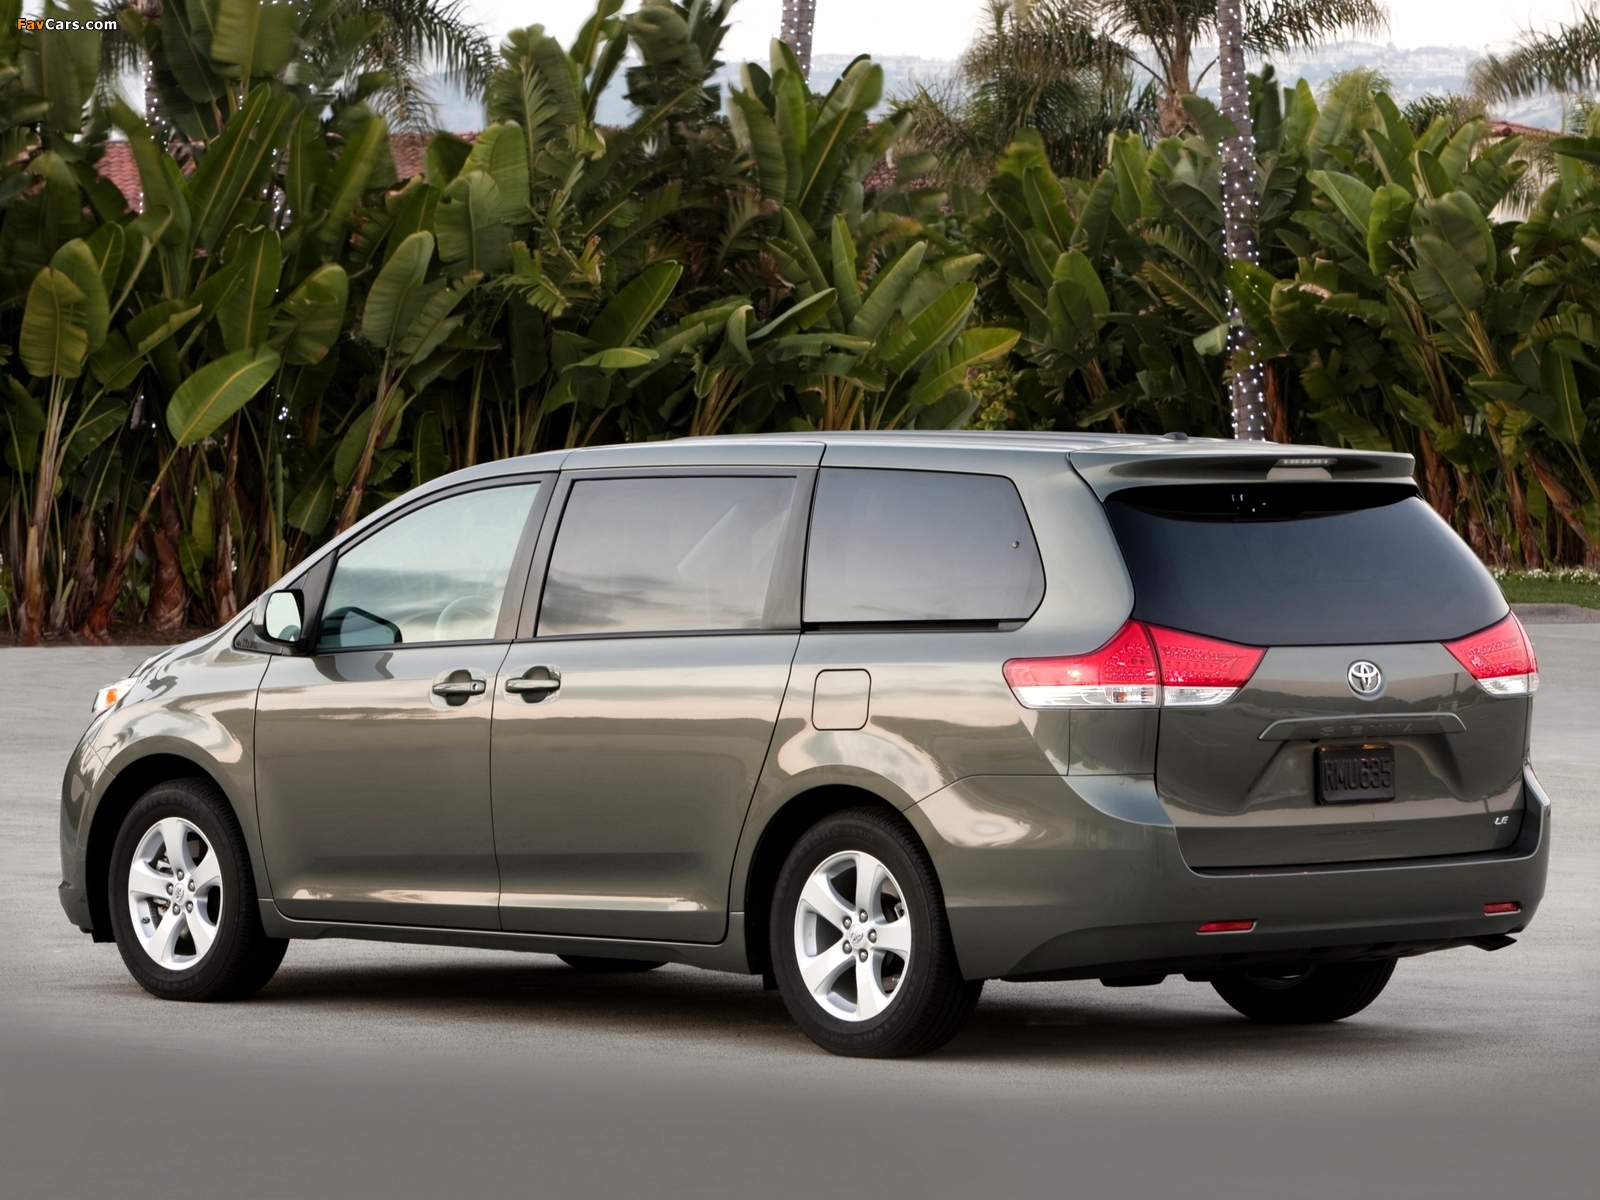 Toyota Sienna 2010 pictures (1600 x 1200)